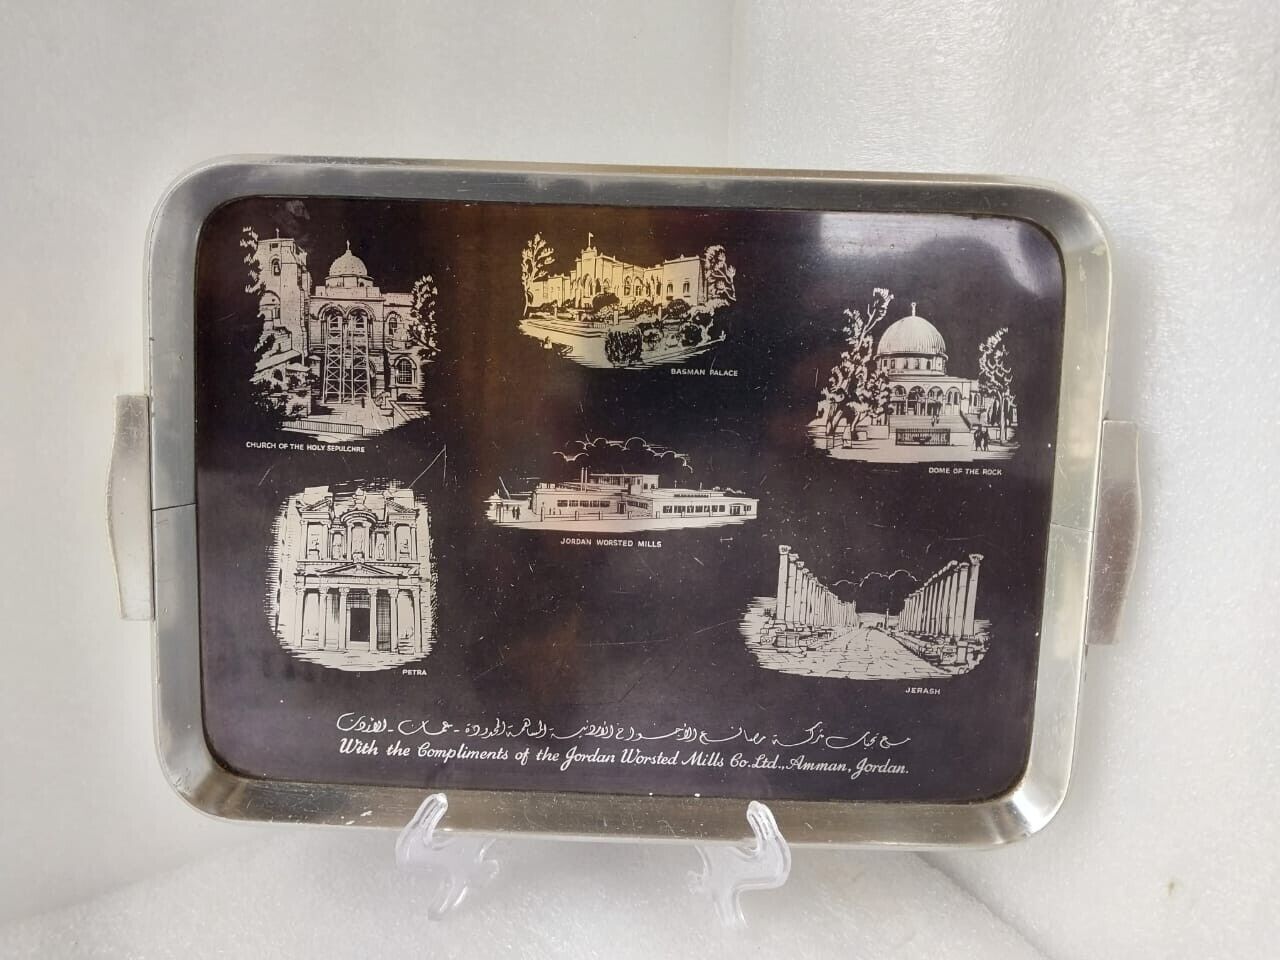 Vintage Jordan Arab Silver plate Worsted Mills special commemorative tray plate